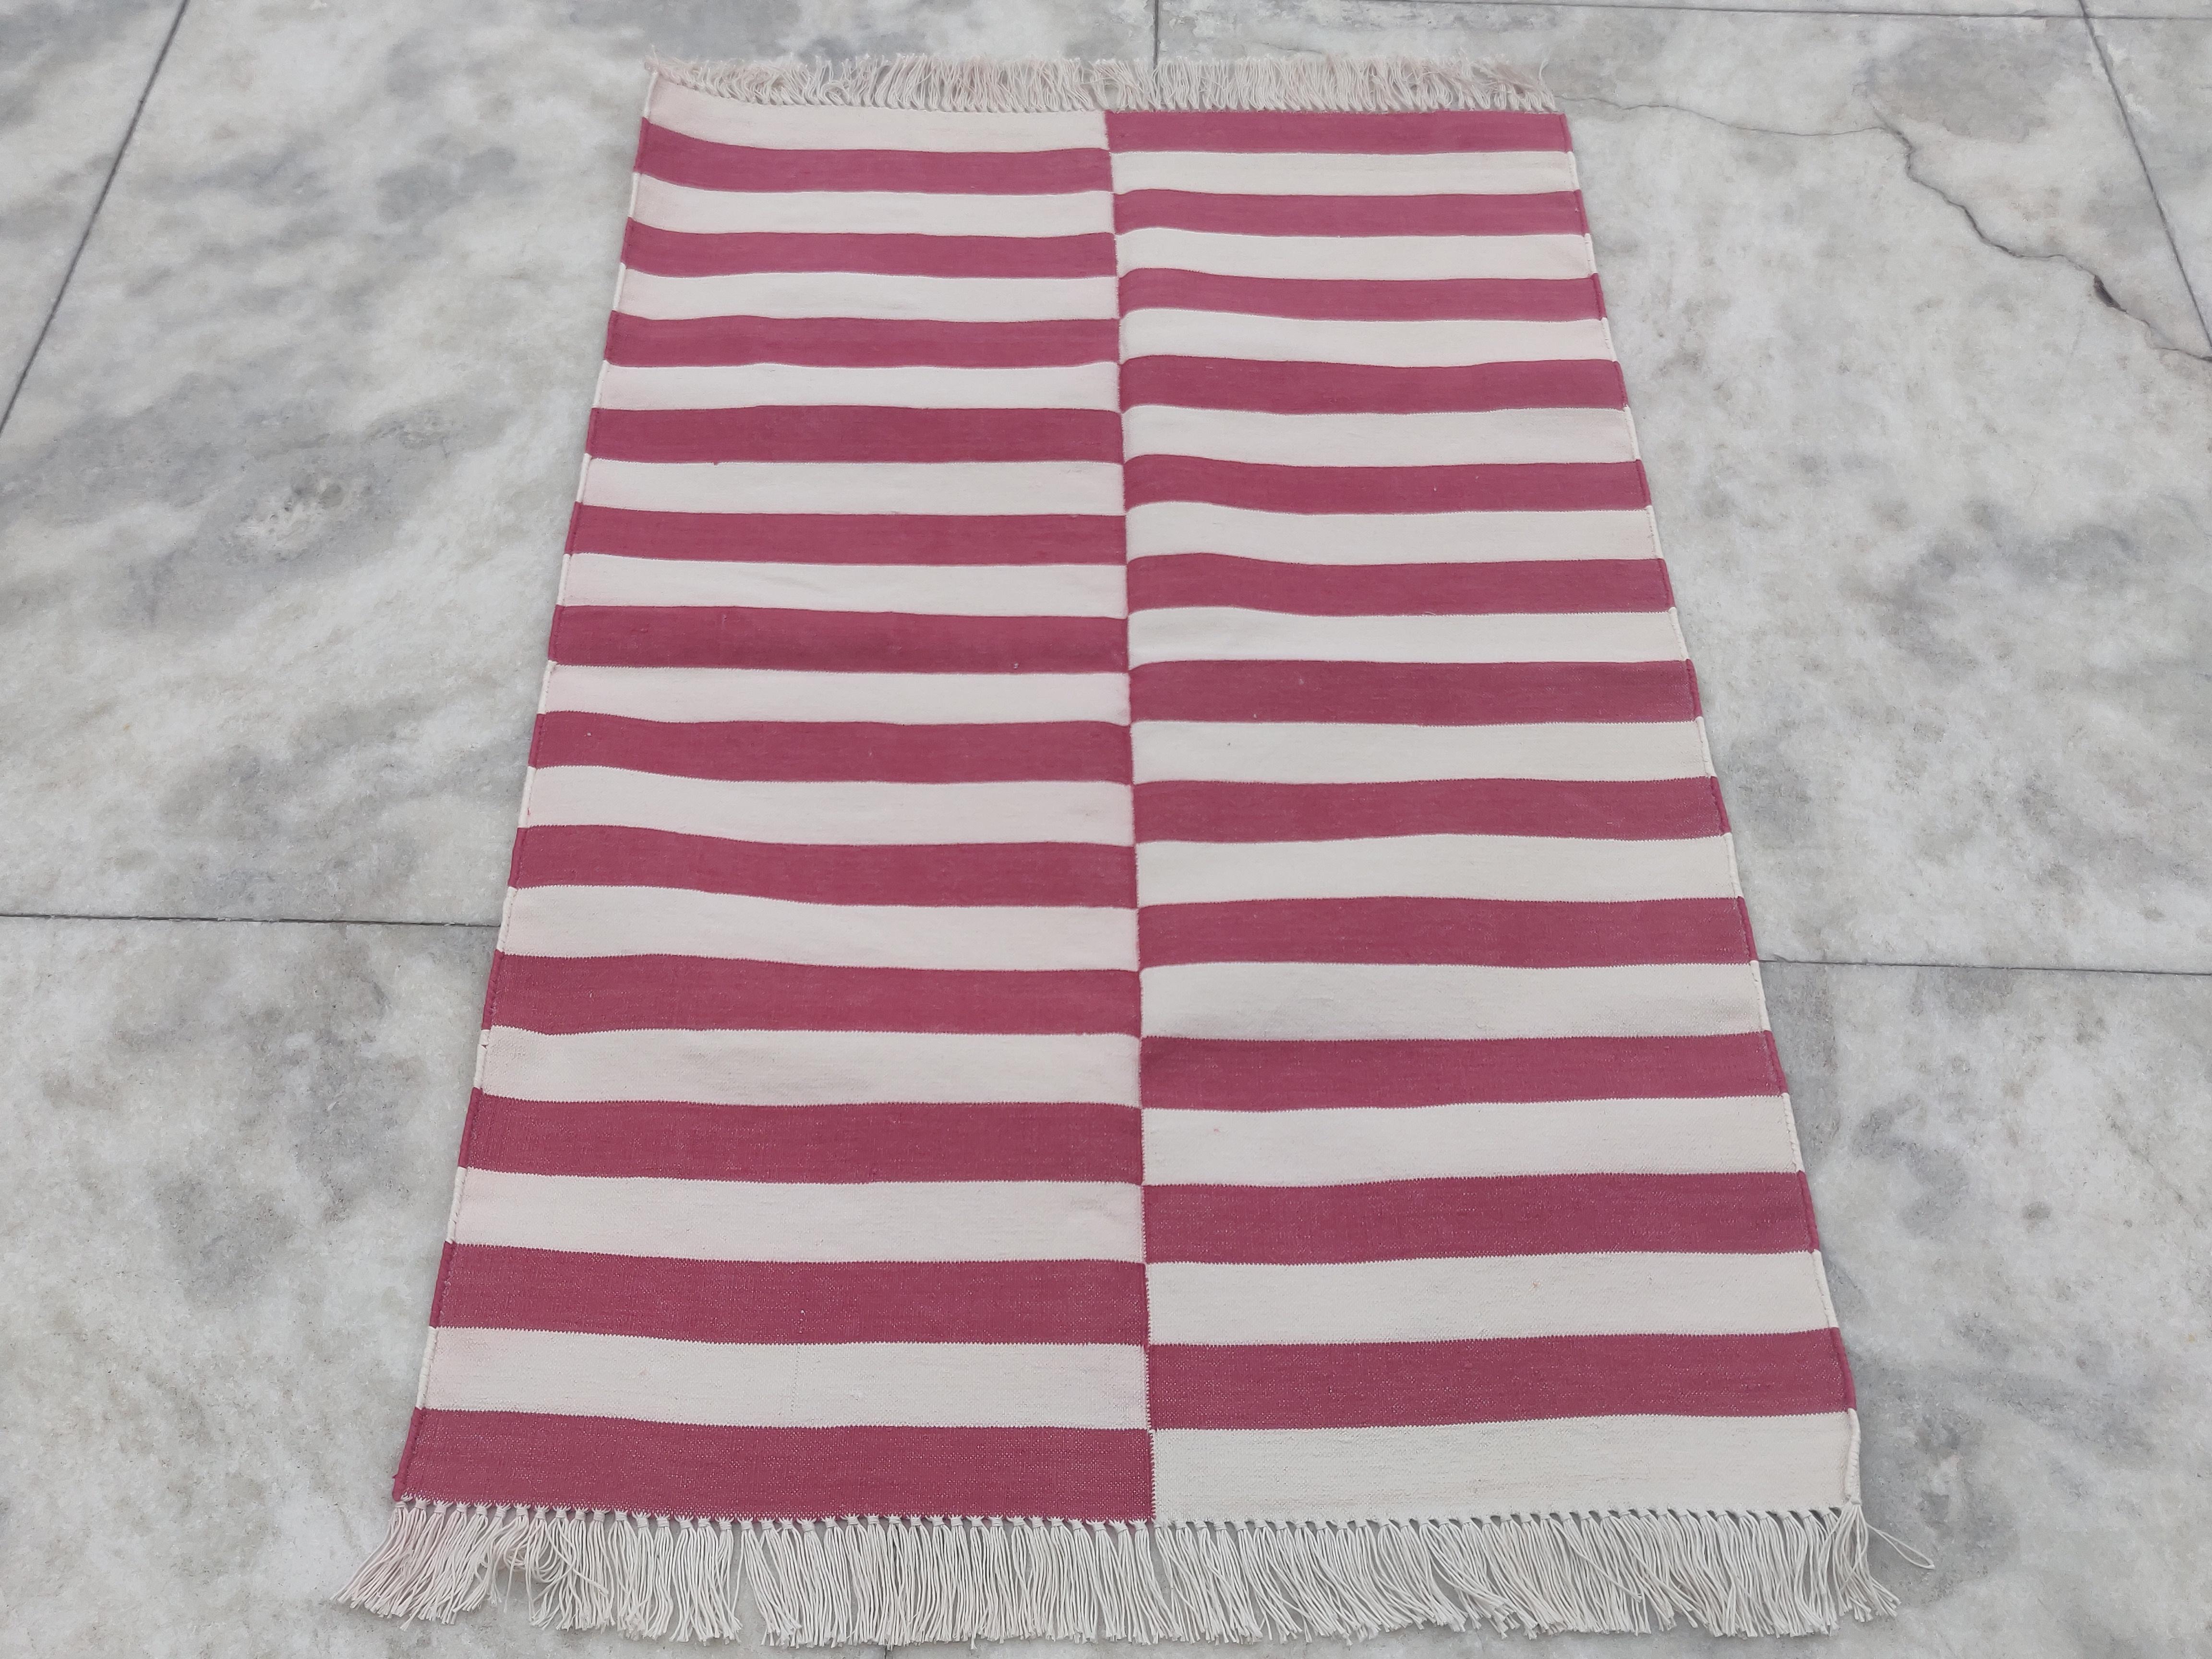 Handmade Cotton Area Flat Weave Rug, 2.5x4 Pink And White Striped Indian Dhurrie In New Condition For Sale In Jaipur, IN